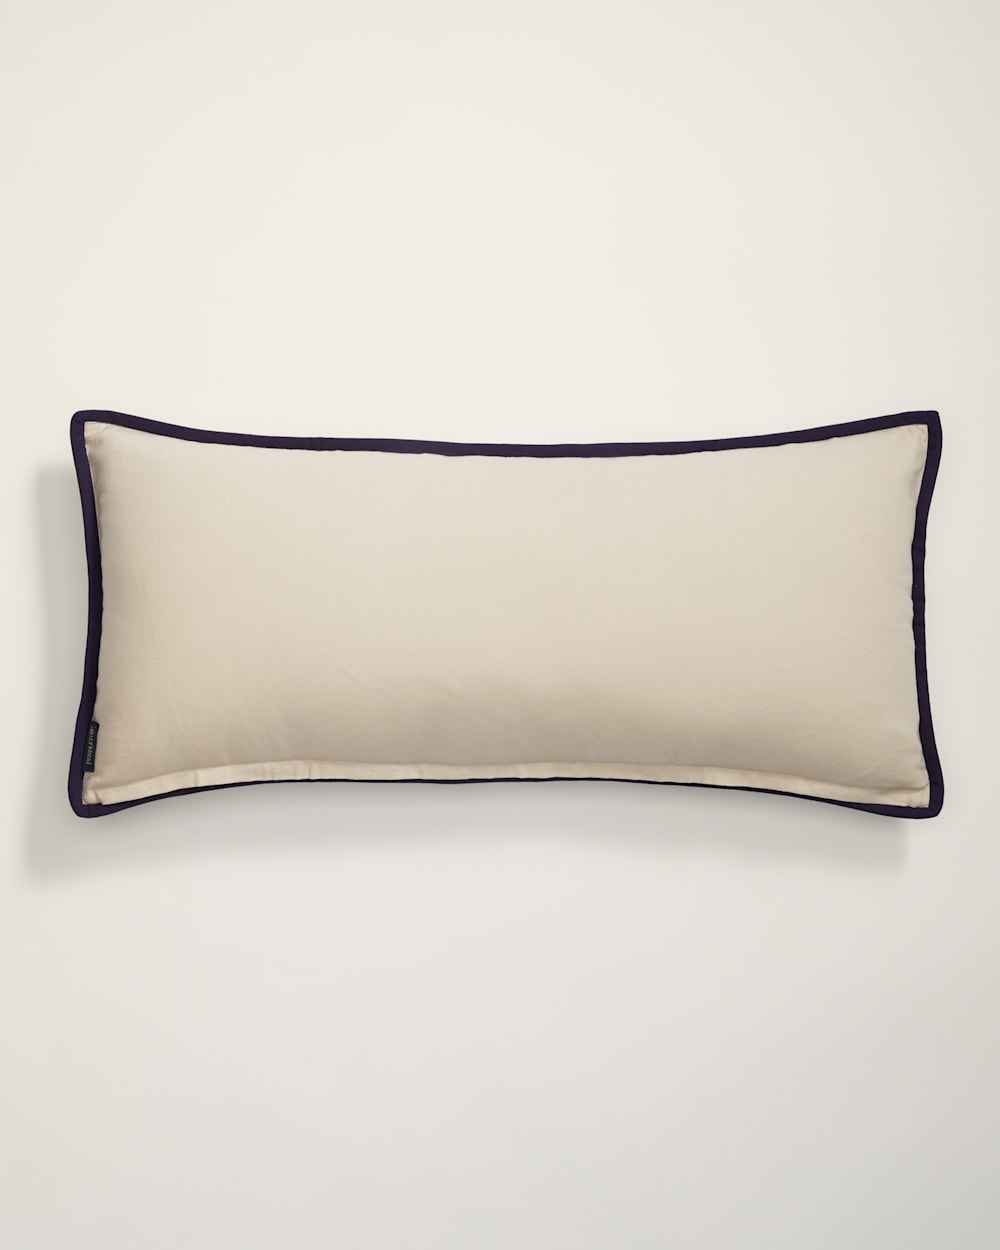 ALTERNATE VIEW OF MEDICINE BOW EMBROIDERED HUG PILLOW IN TAN/BLUE MULTI image number 3